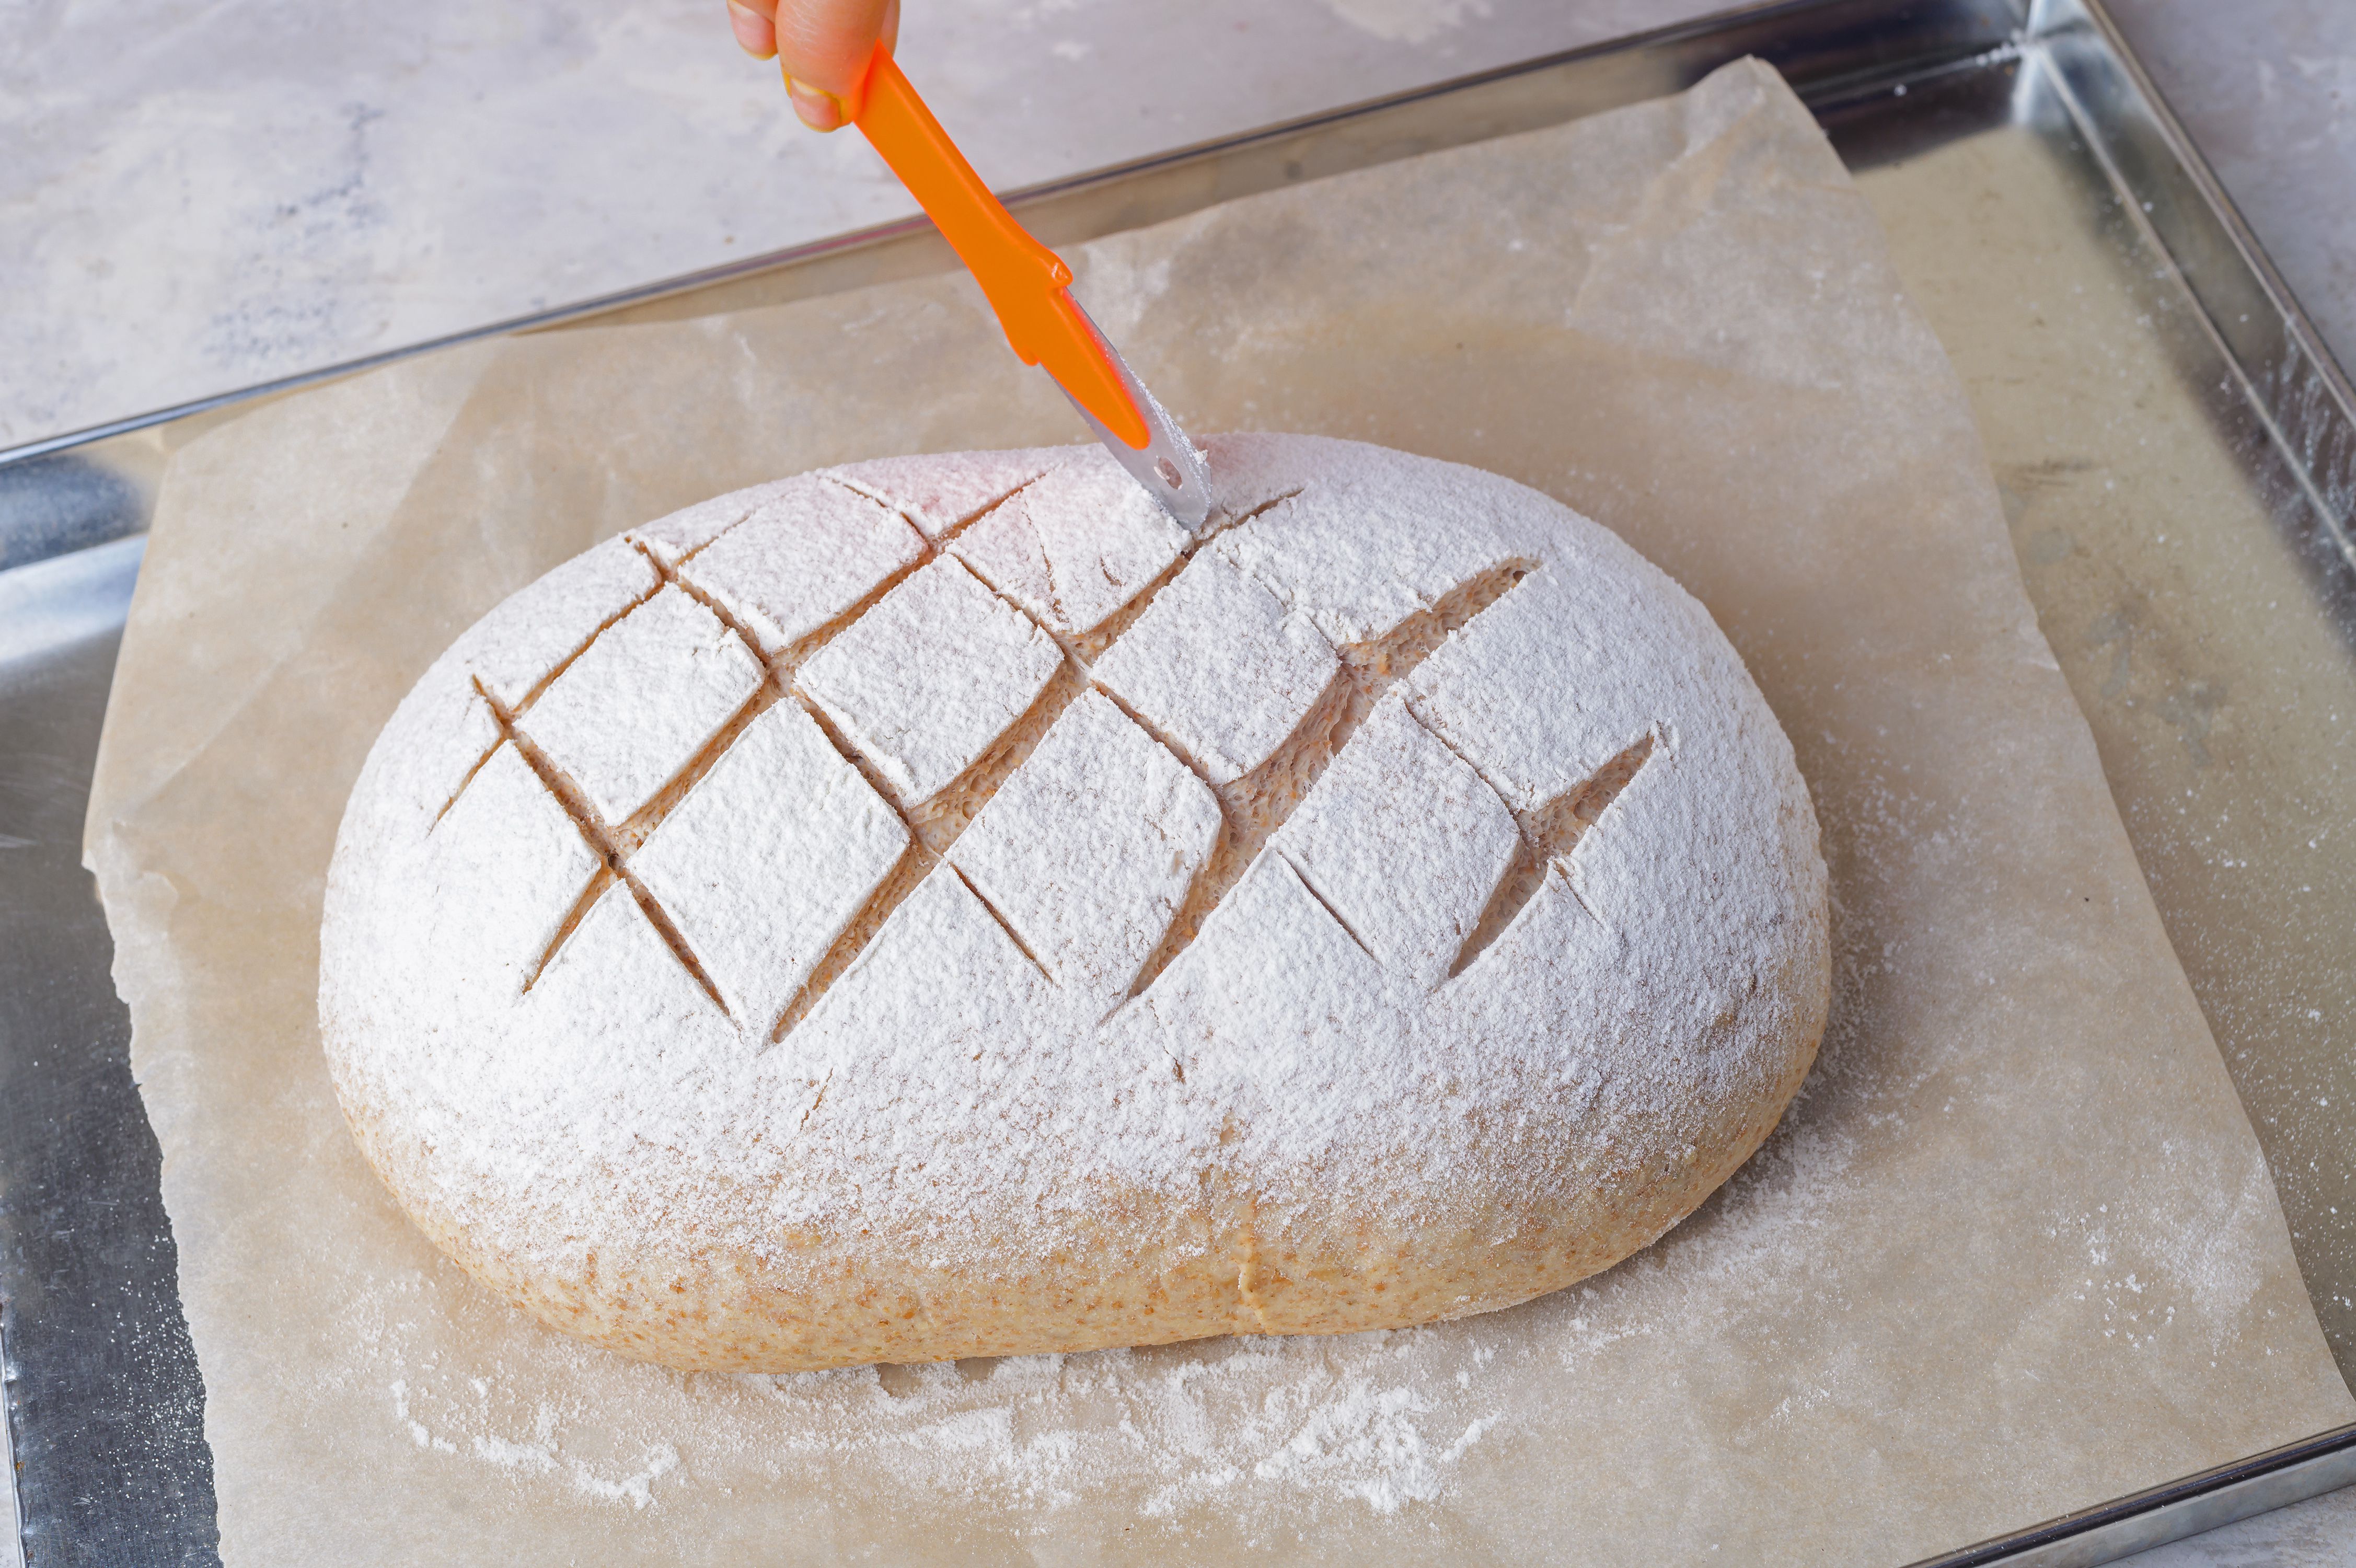 Whats the Deal With Scoring Bread Dough?